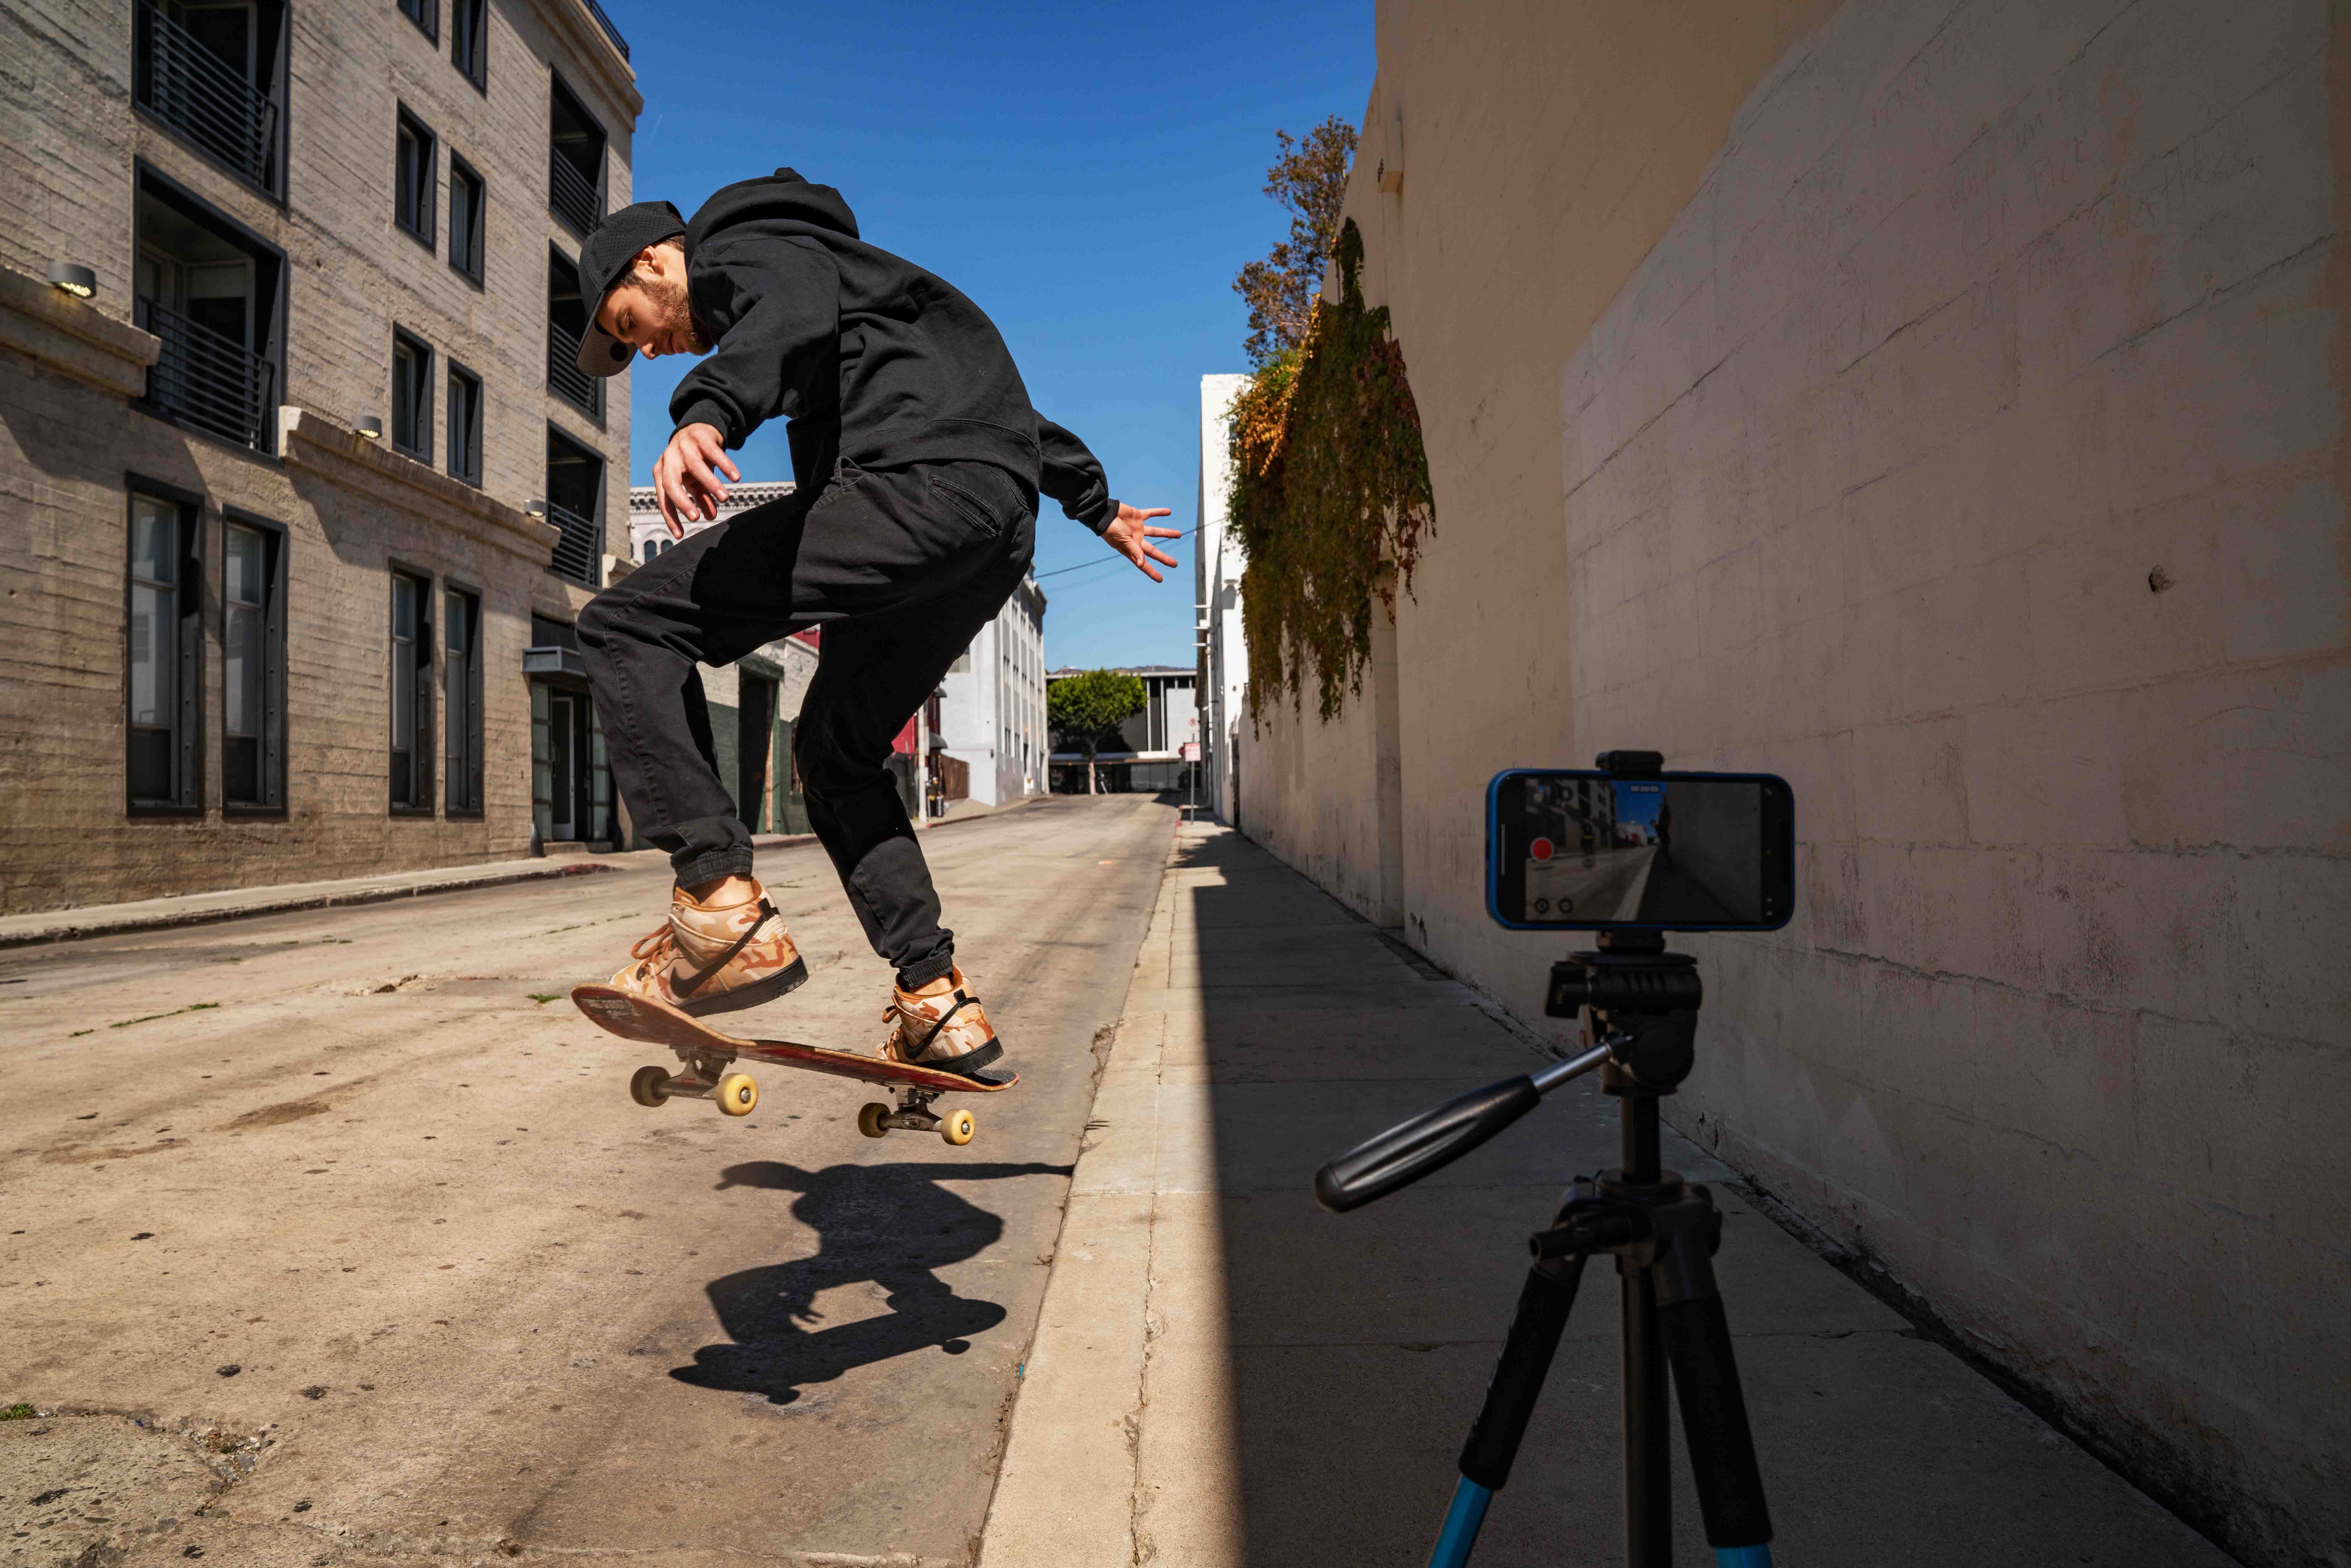 man wearing a black hat, black hoodie, black jeans and tan-camo shoes doing a trick on a skateboard on an empty street with a phone recording a video of the process